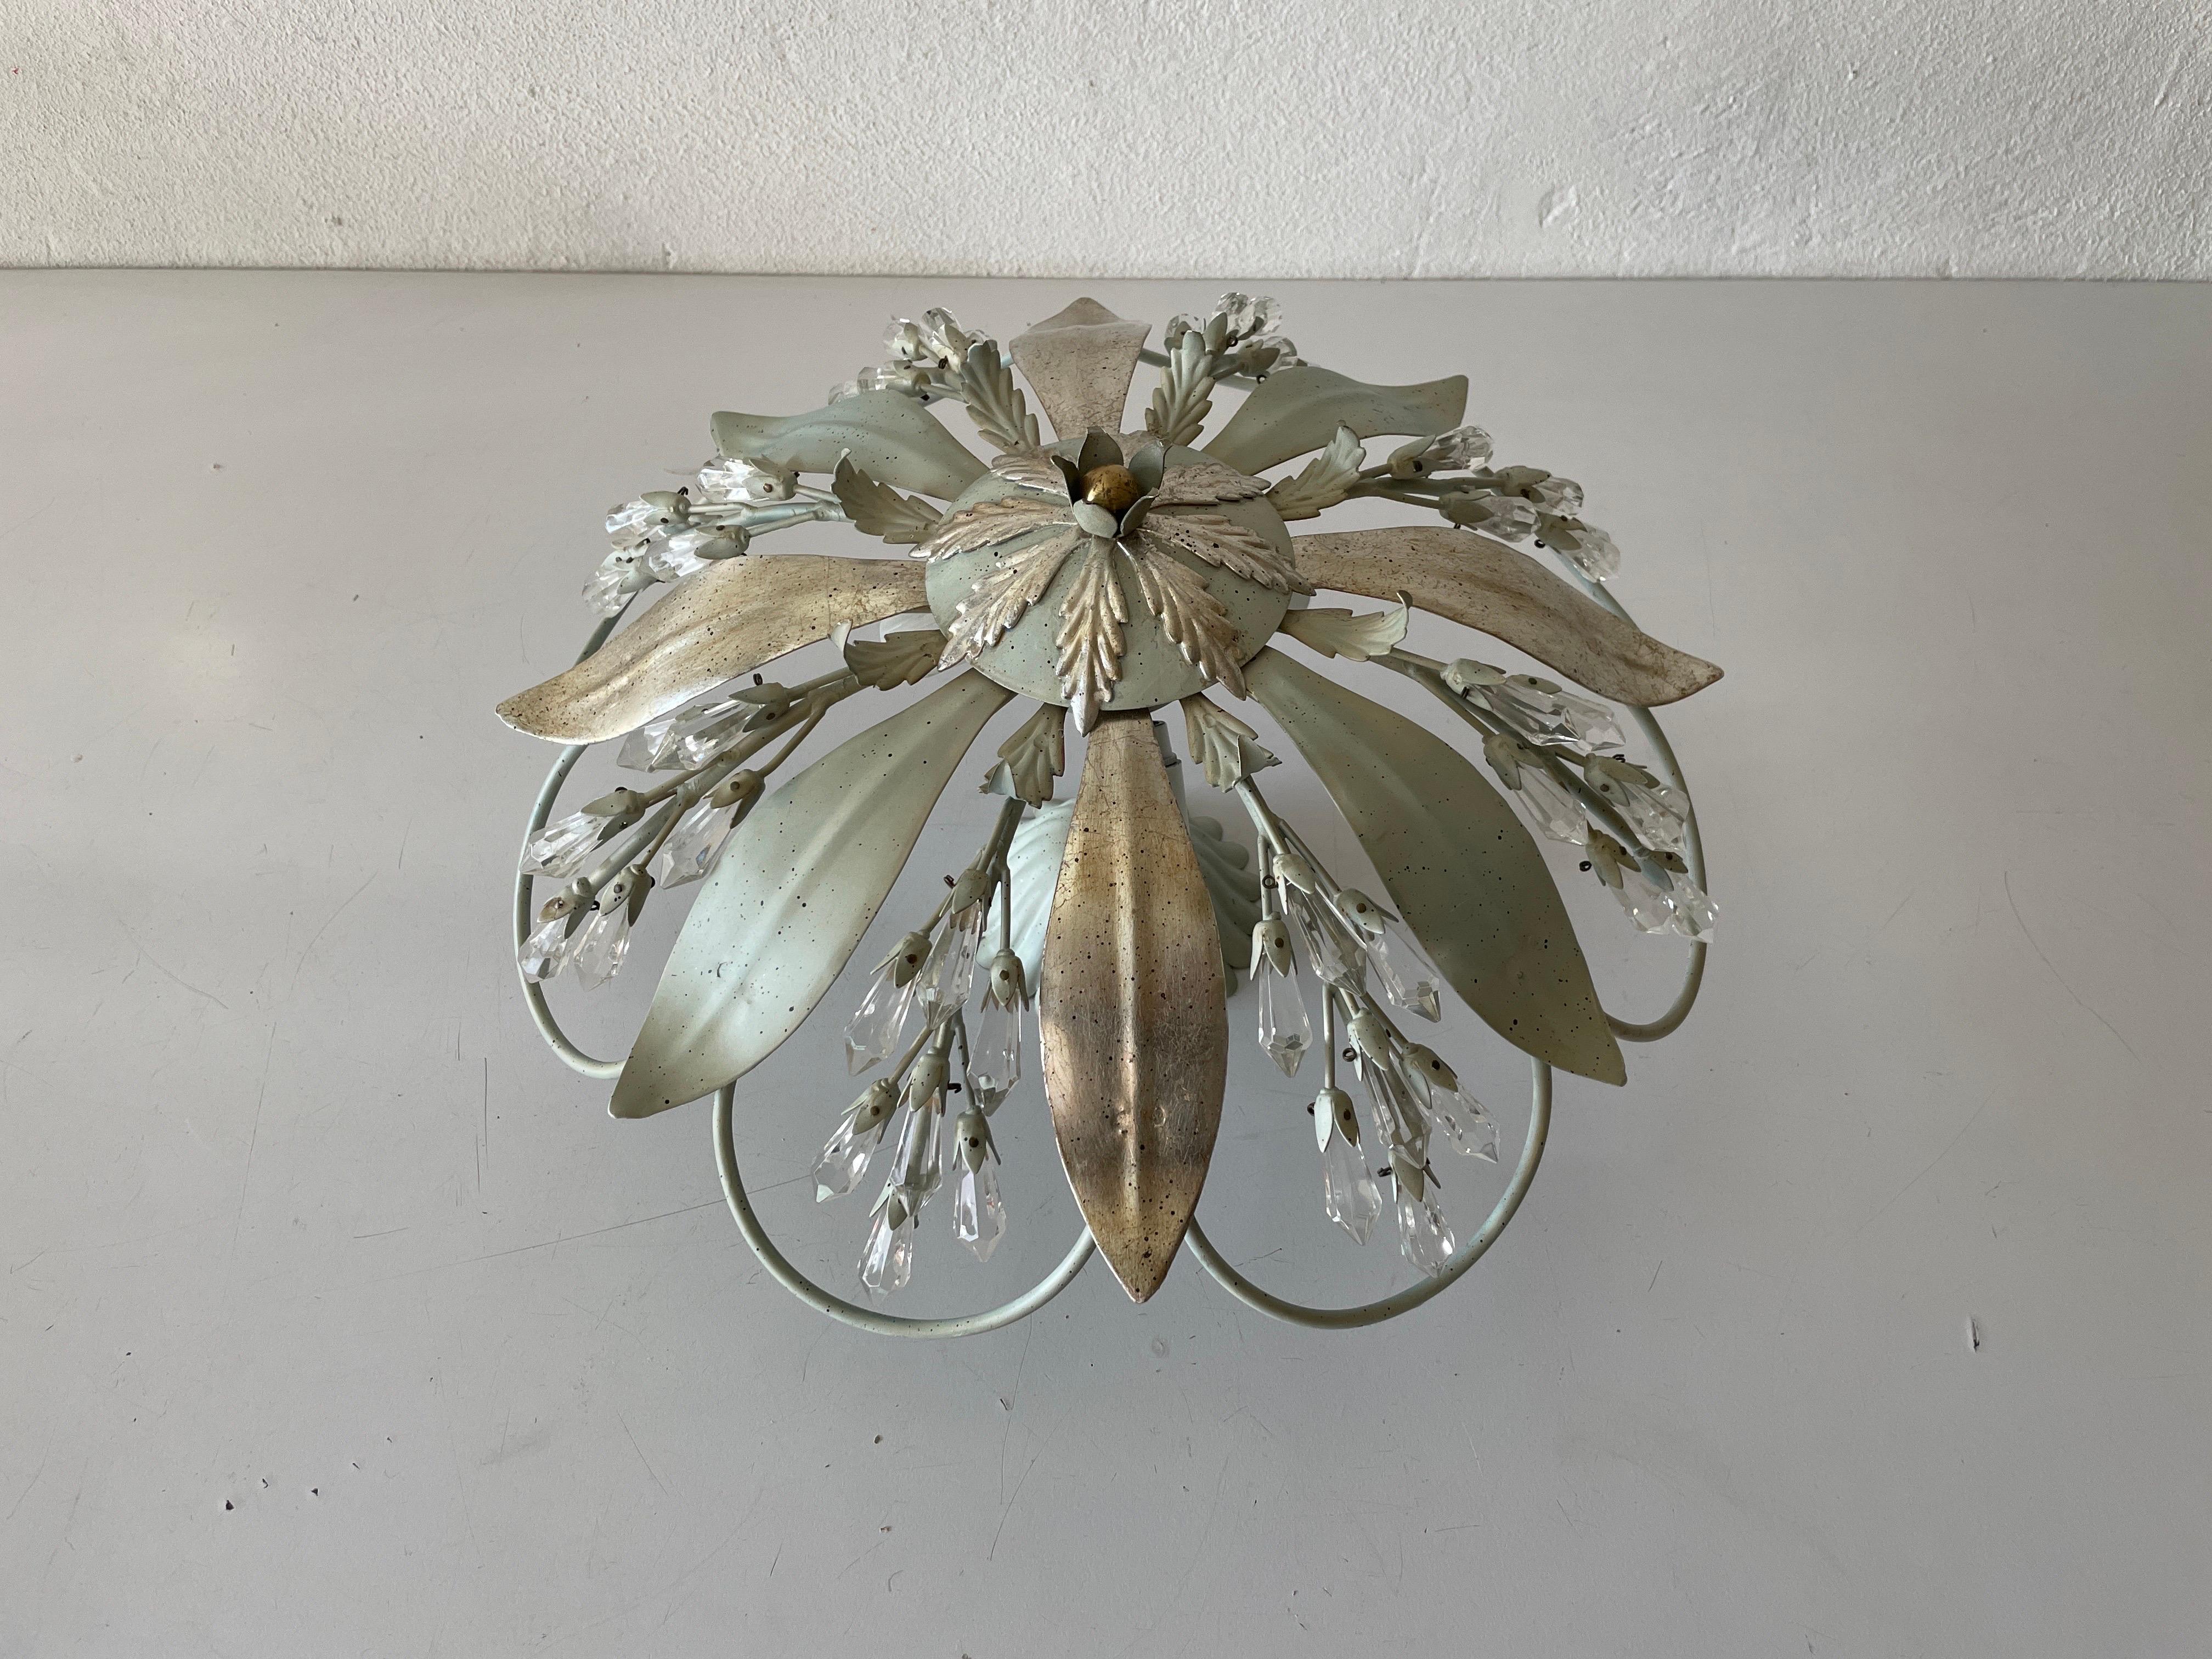 Flower Design Ceiling Lamp with Glass Ornaments, 1950s, Germany For Sale 3